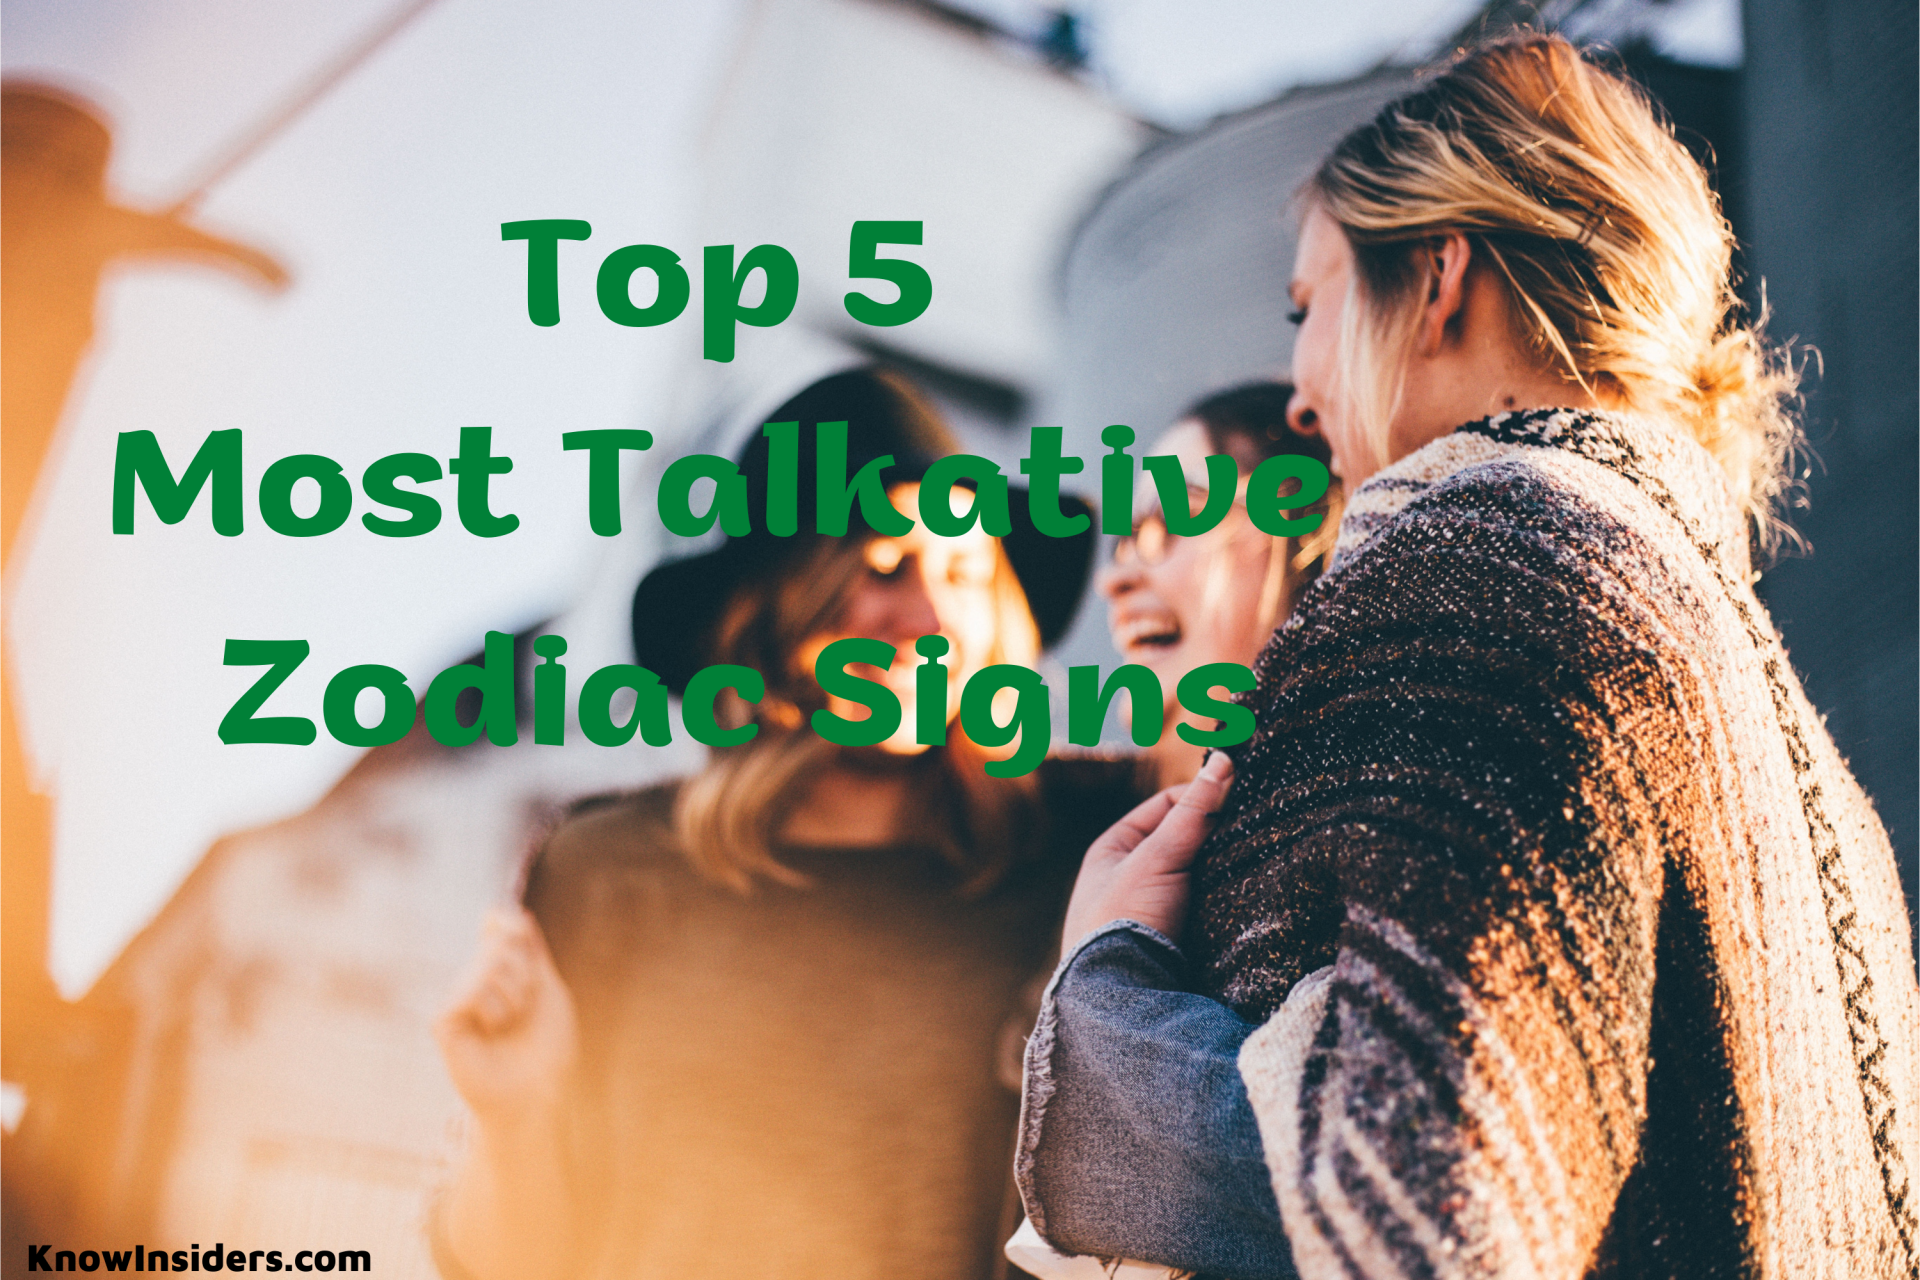 Top 5 Most Talkative Zodiac Signs - According to Astrology